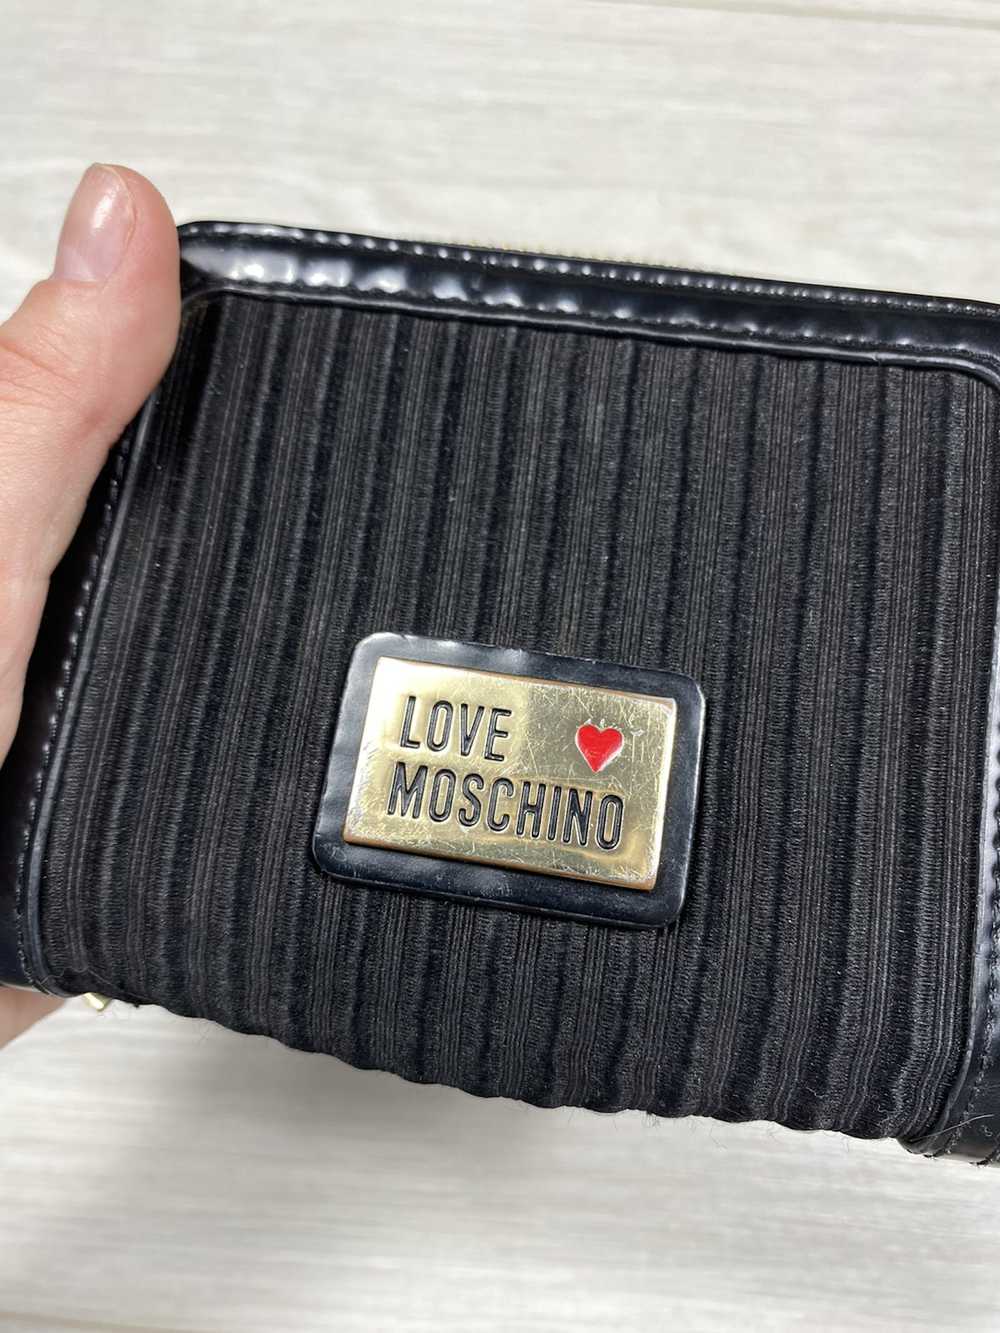 Love Moschino × Vintage Love Moschino wallet purse - image 3